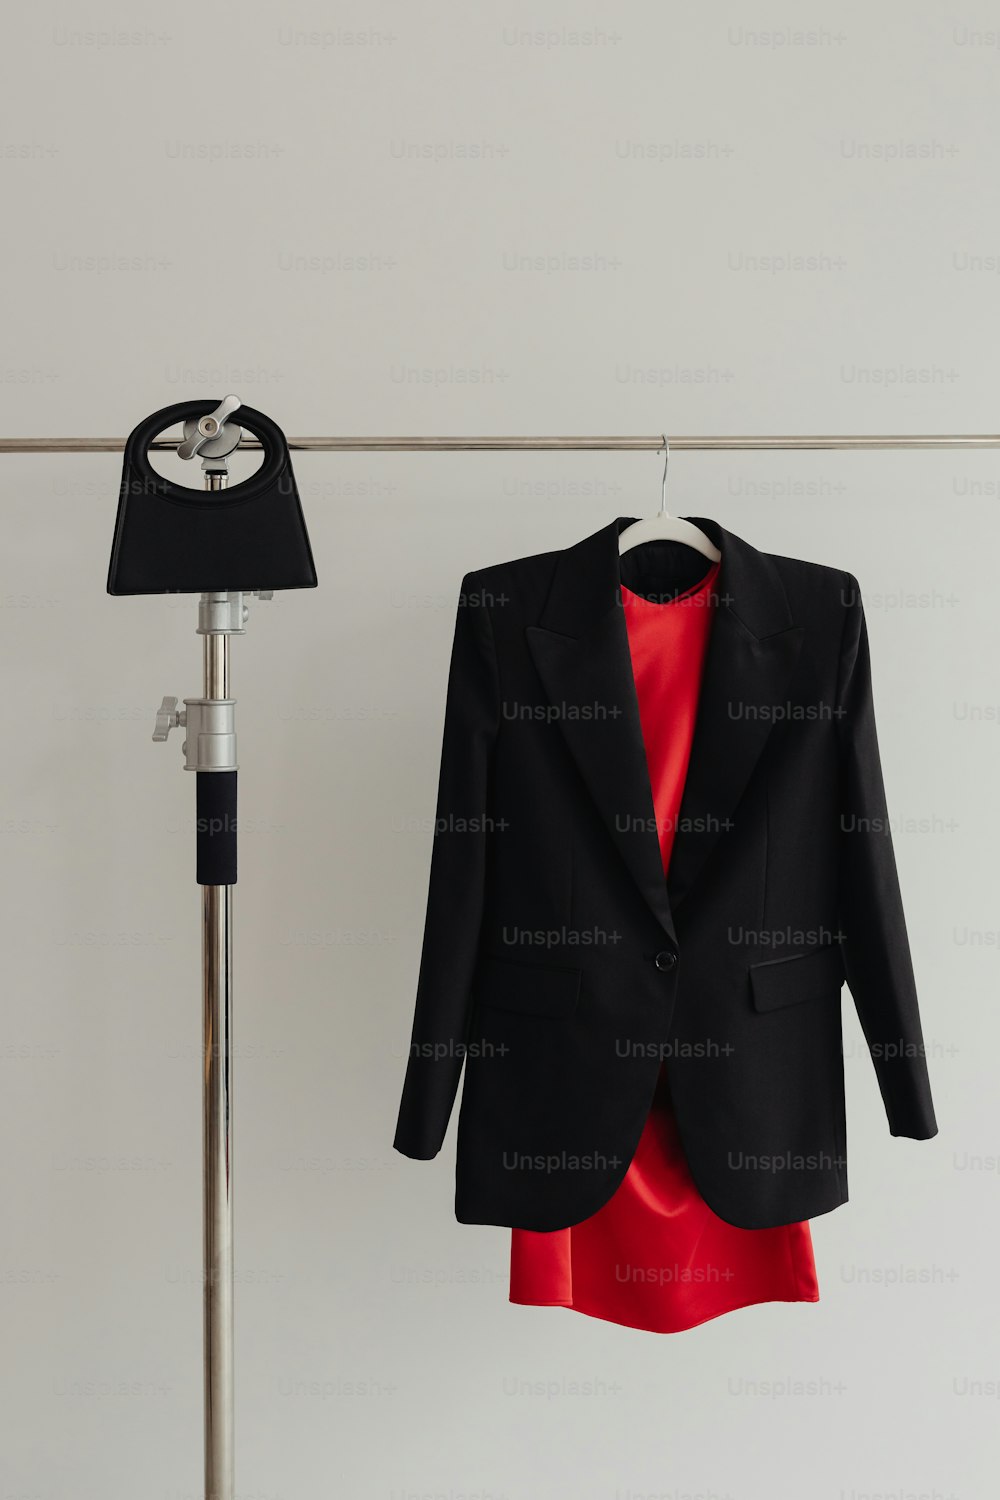 a black jacket hanging on a clothes line next to a red dress